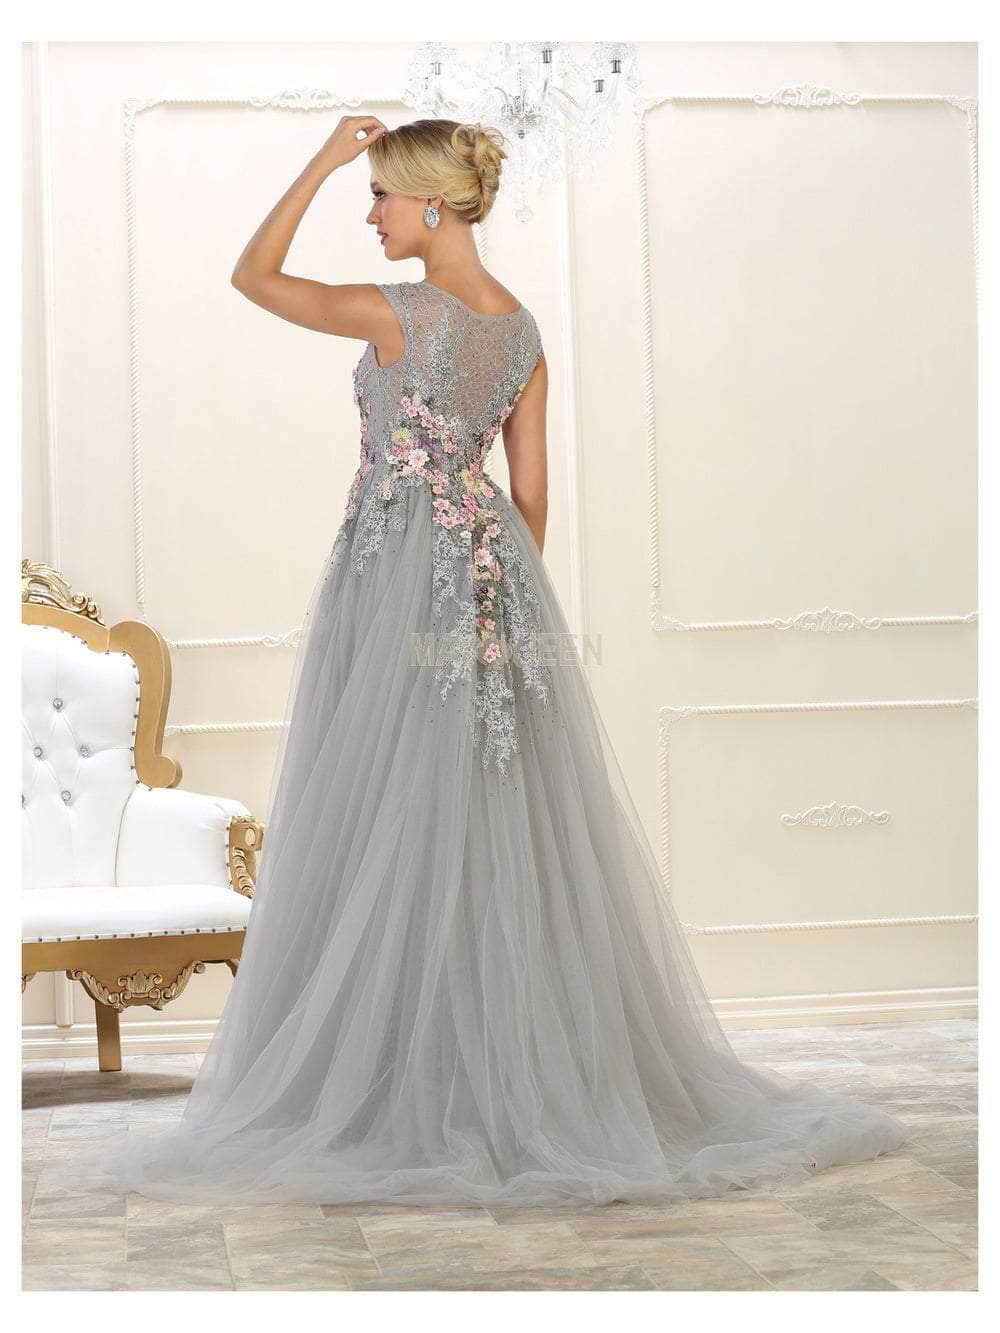 May Queen RQ7596 - Laced Overlay Dress Special Occasion Dress